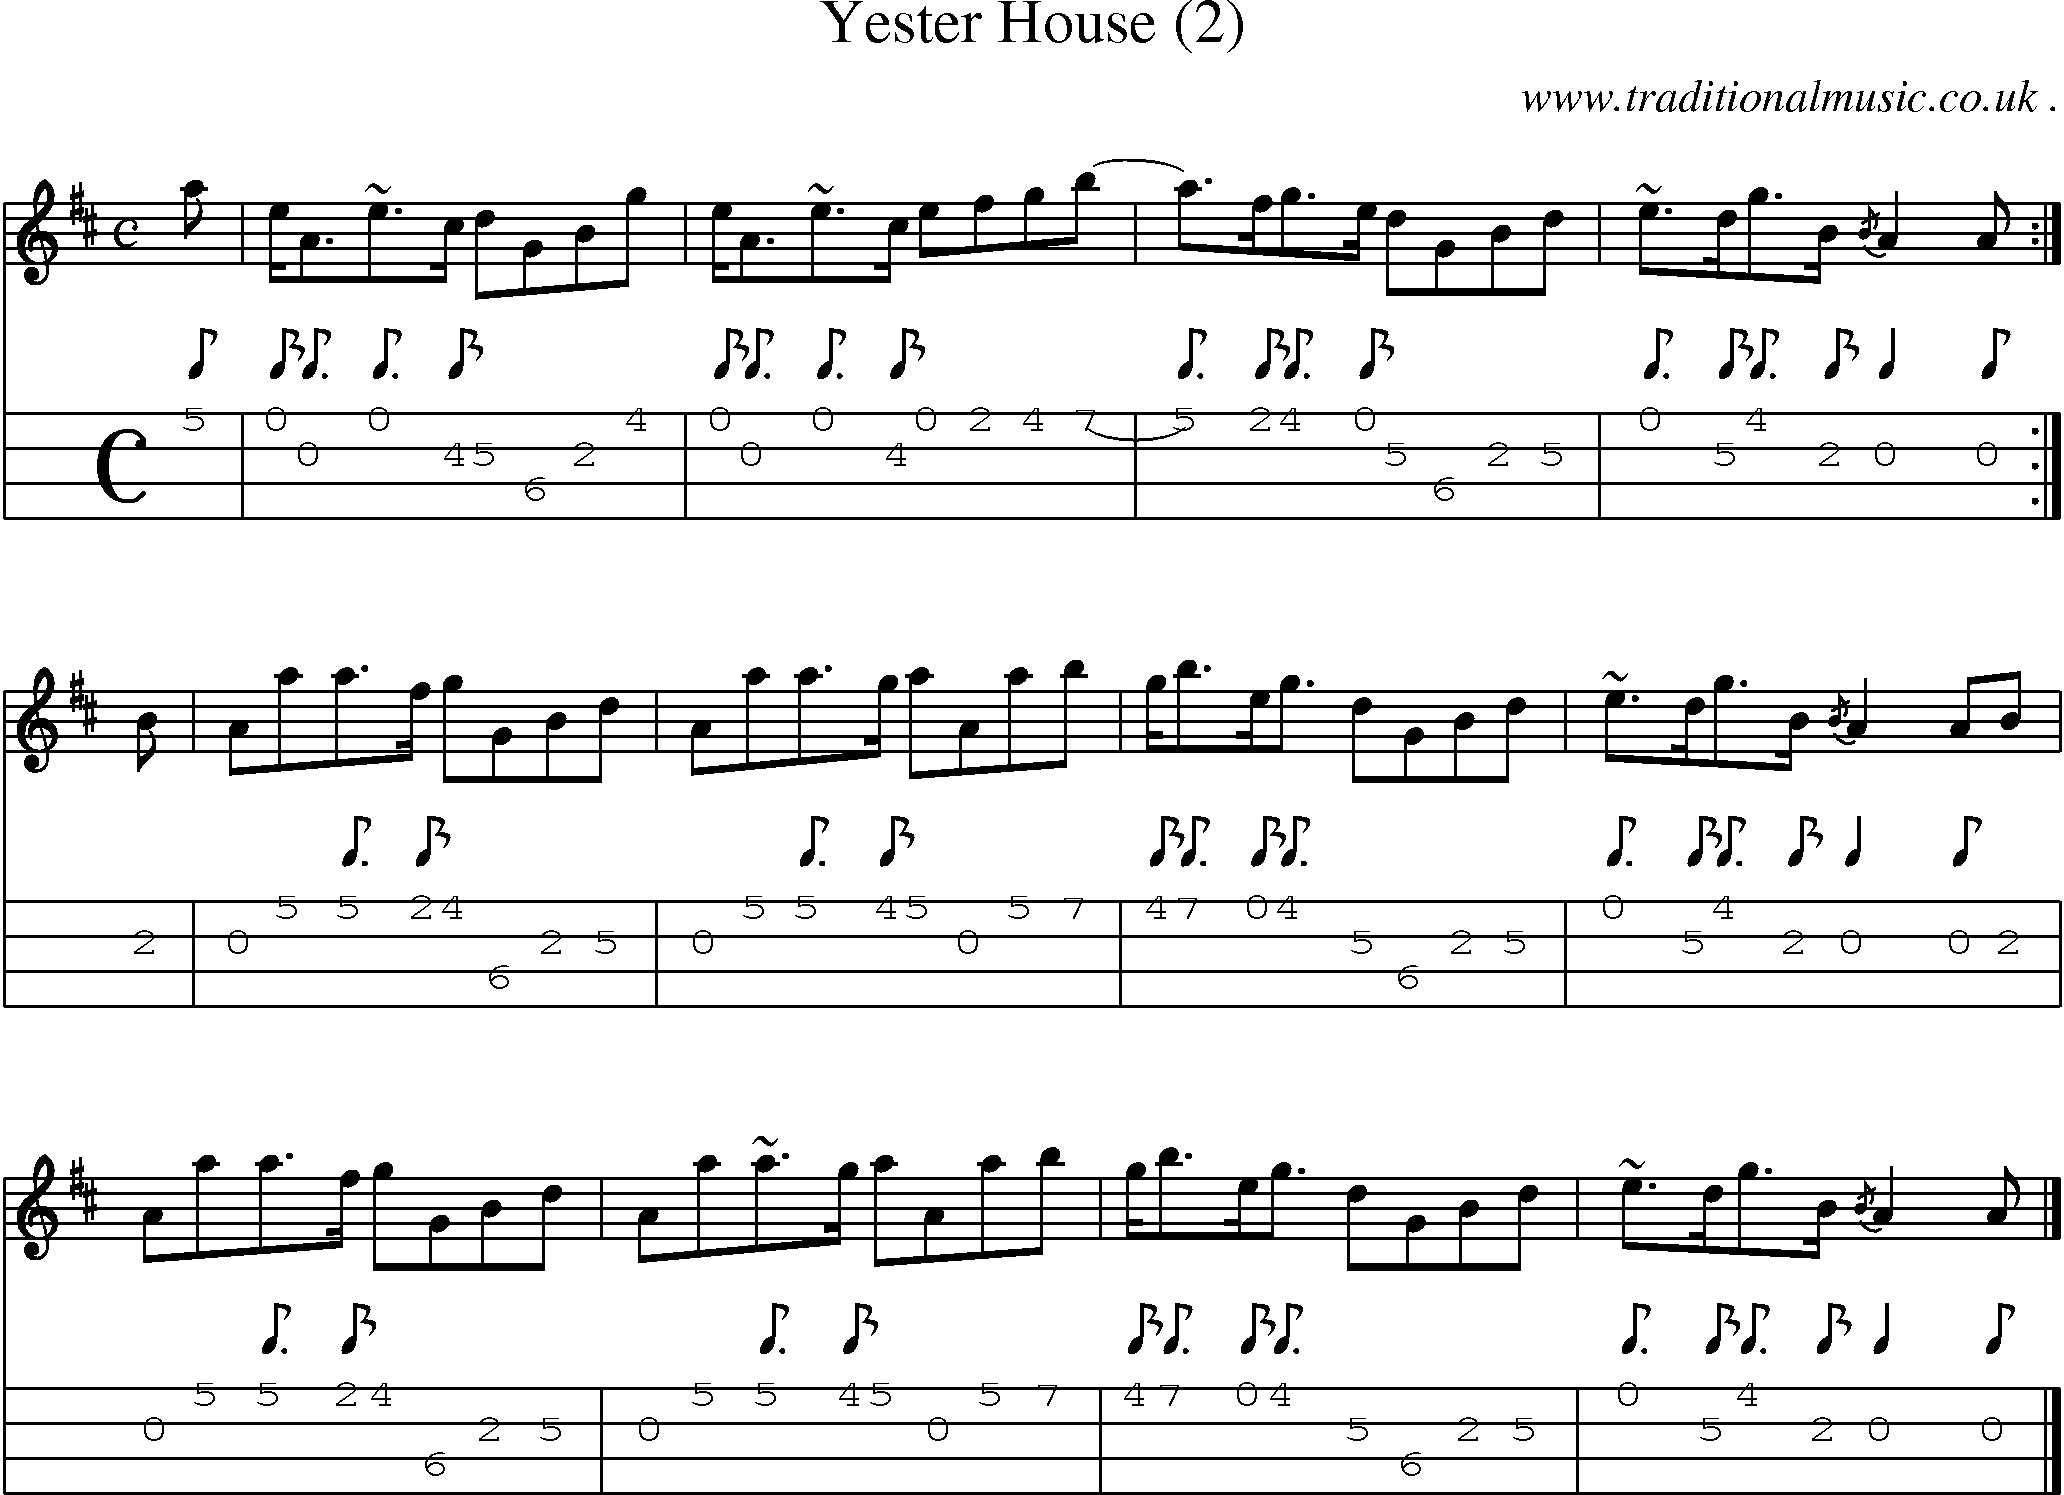 Sheet-music  score, Chords and Mandolin Tabs for Yester House 2